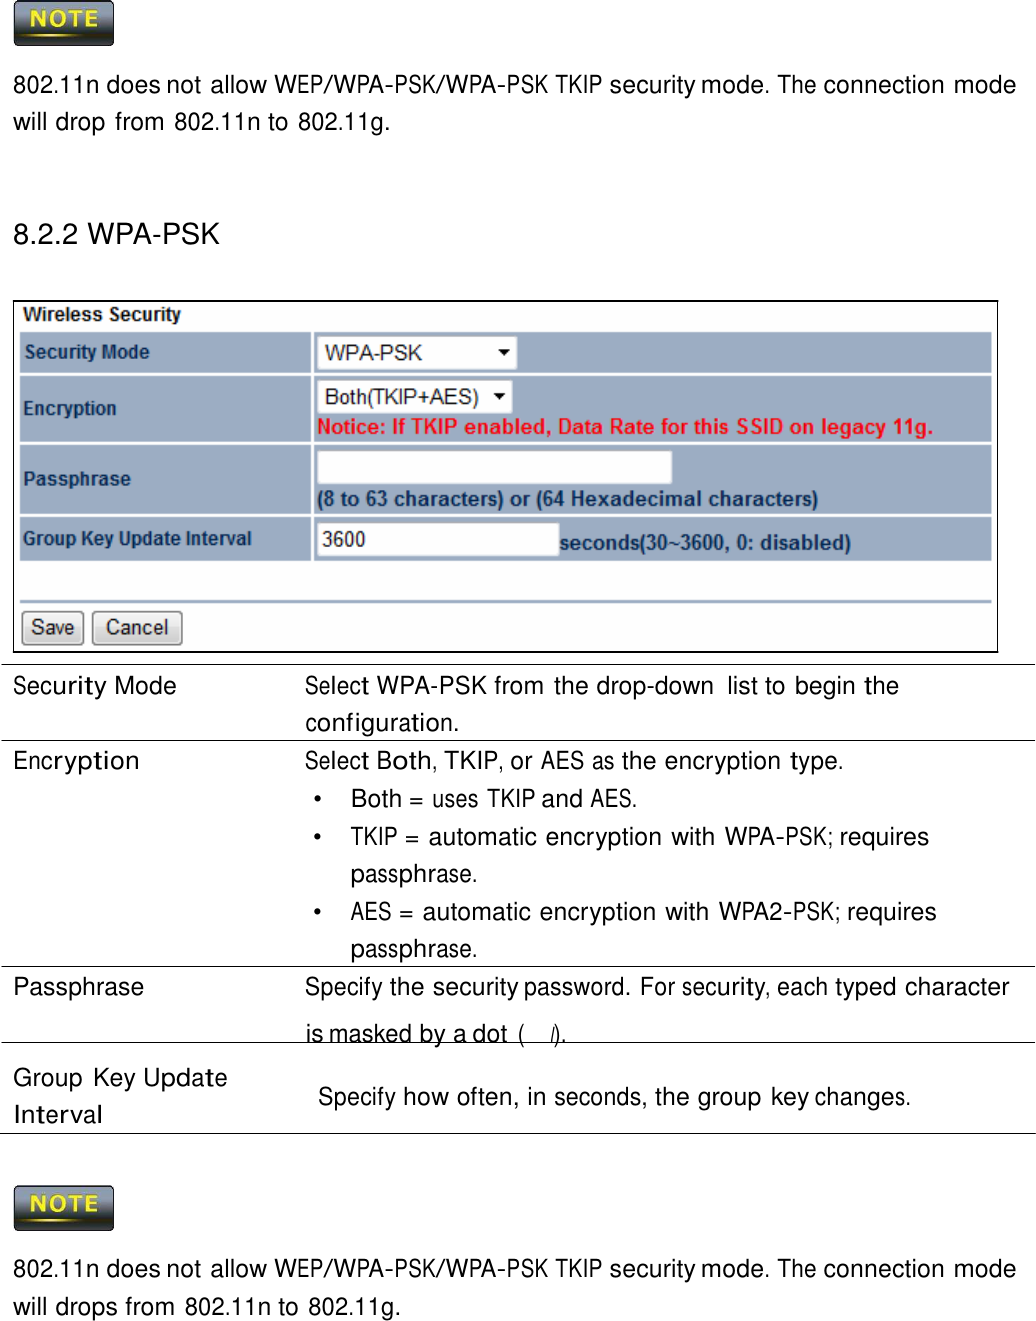    802.11n does not allow WEP/WPA-PSK/WPA-PSK TKIP security mode. The connection mode will drop from 802.11n to 802.11g.     8.2.2 WPA-PSK                     Security Mode  Select WPA-PSK from the drop-down  list to begin the configuration. Encryption Select Both, TKIP, or AES as the encryption type. •   Both = uses TKIP and AES. •  TKIP = automatic encryption with WPA-PSK; requires passphrase. •  AES = automatic encryption with WPA2-PSK; requires passphrase. Passphrase Specify the security password. For security, each typed character is masked by a dot (l). Group Key Update Interval  Specify how often, in seconds, the group key changes.      802.11n does not allow WEP/WPA-PSK/WPA-PSK TKIP security mode. The connection mode will drops from 802.11n to 802.11g. 